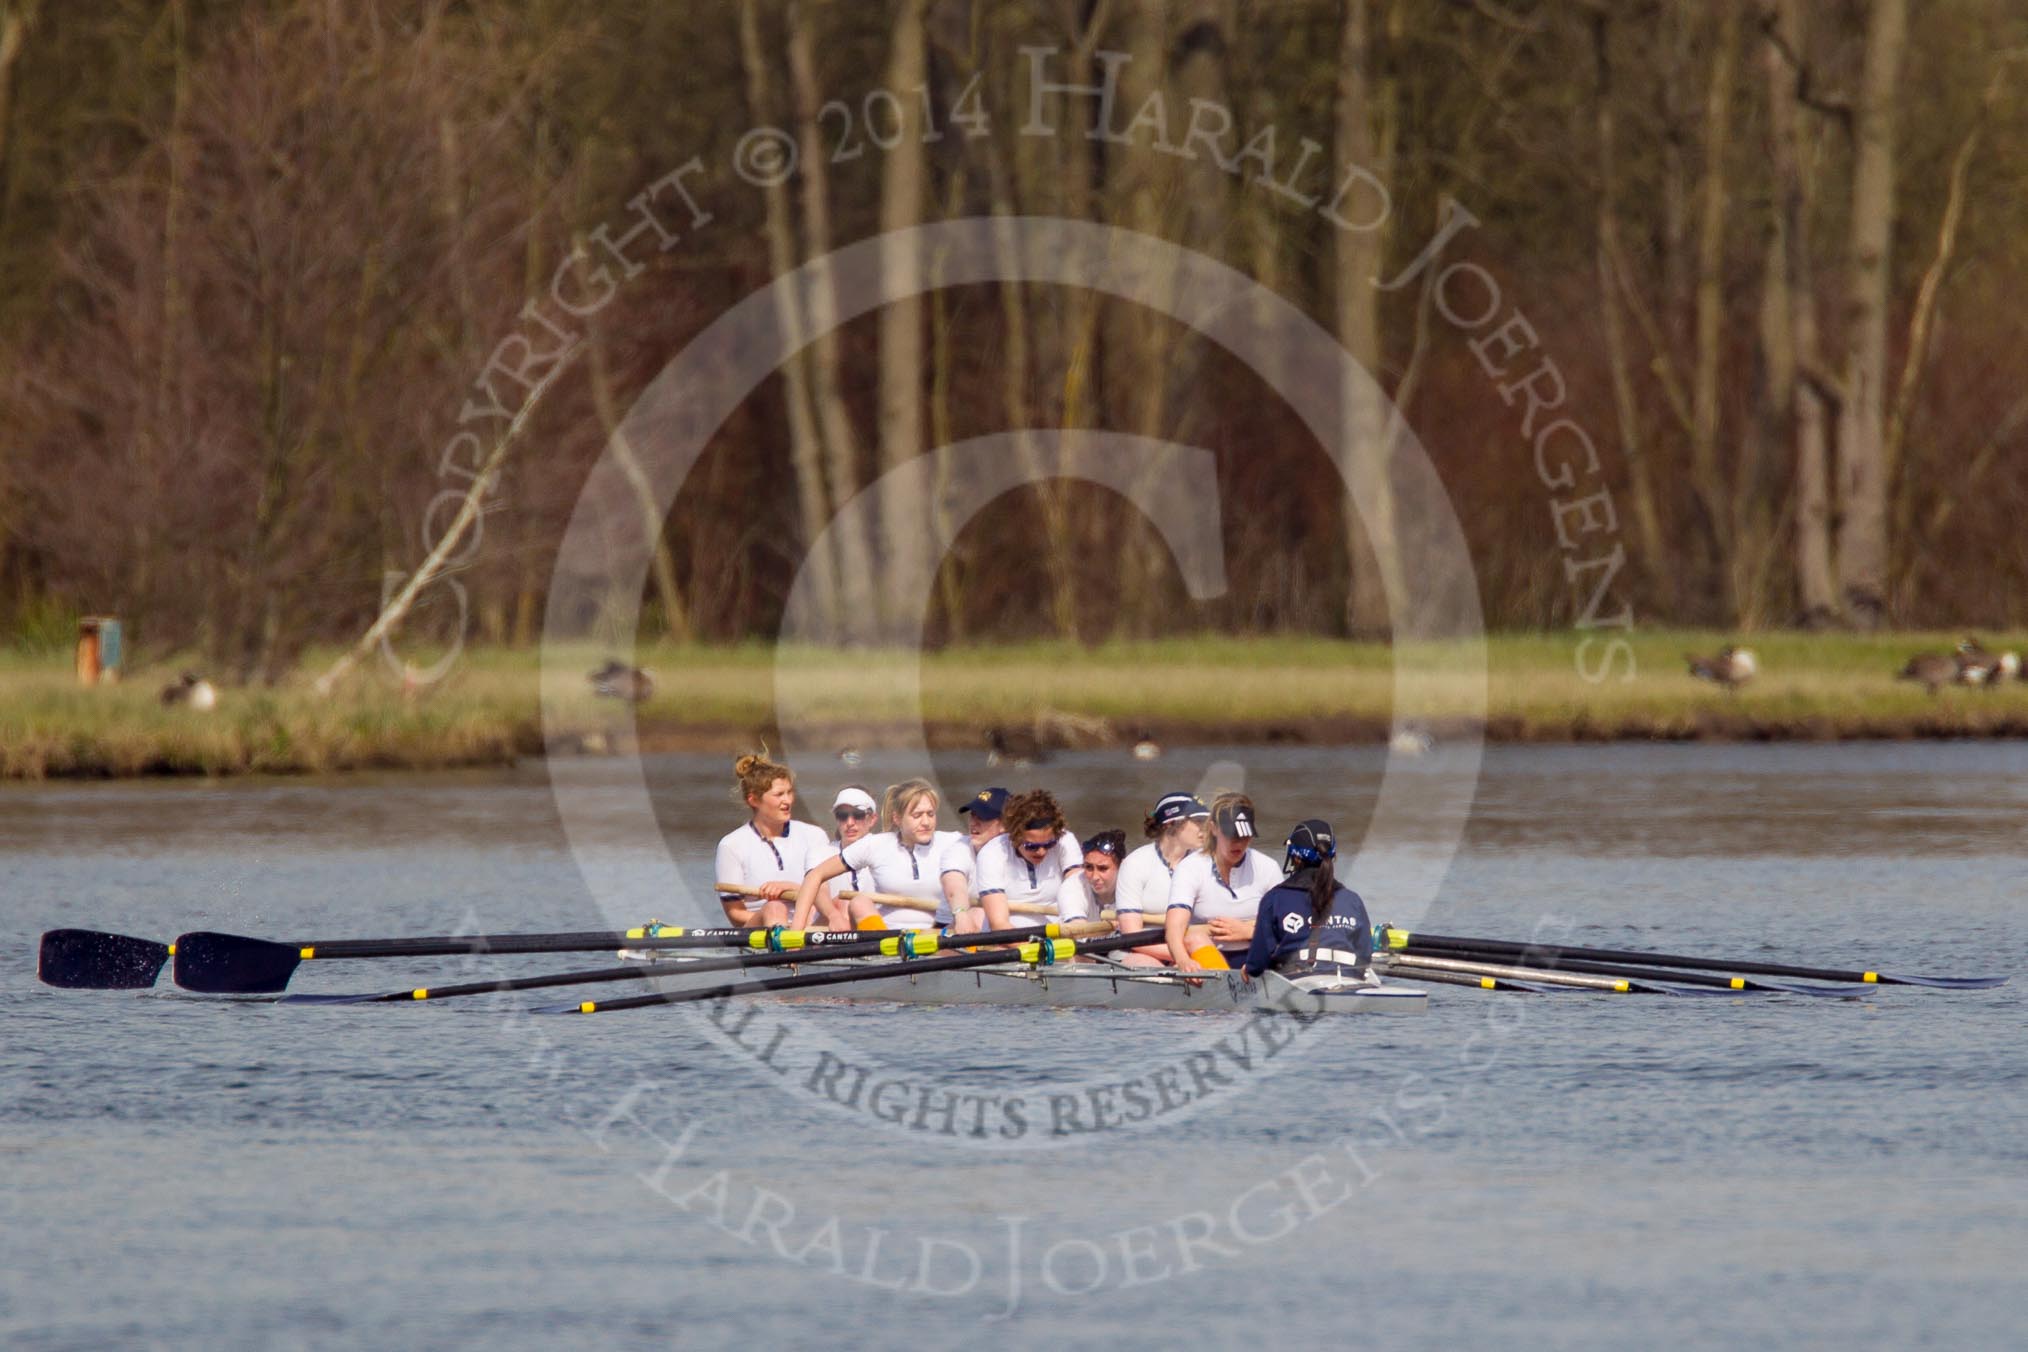 The Women's Boat Race and Henley Boat Races 2014: The Intercollegiate women's race. The Trinity College (Cambridge) boat after passing the finish line..
River Thames,
Henley-on-Thames,
Buckinghamshire,
United Kingdom,
on 30 March 2014 at 13:29, image #50